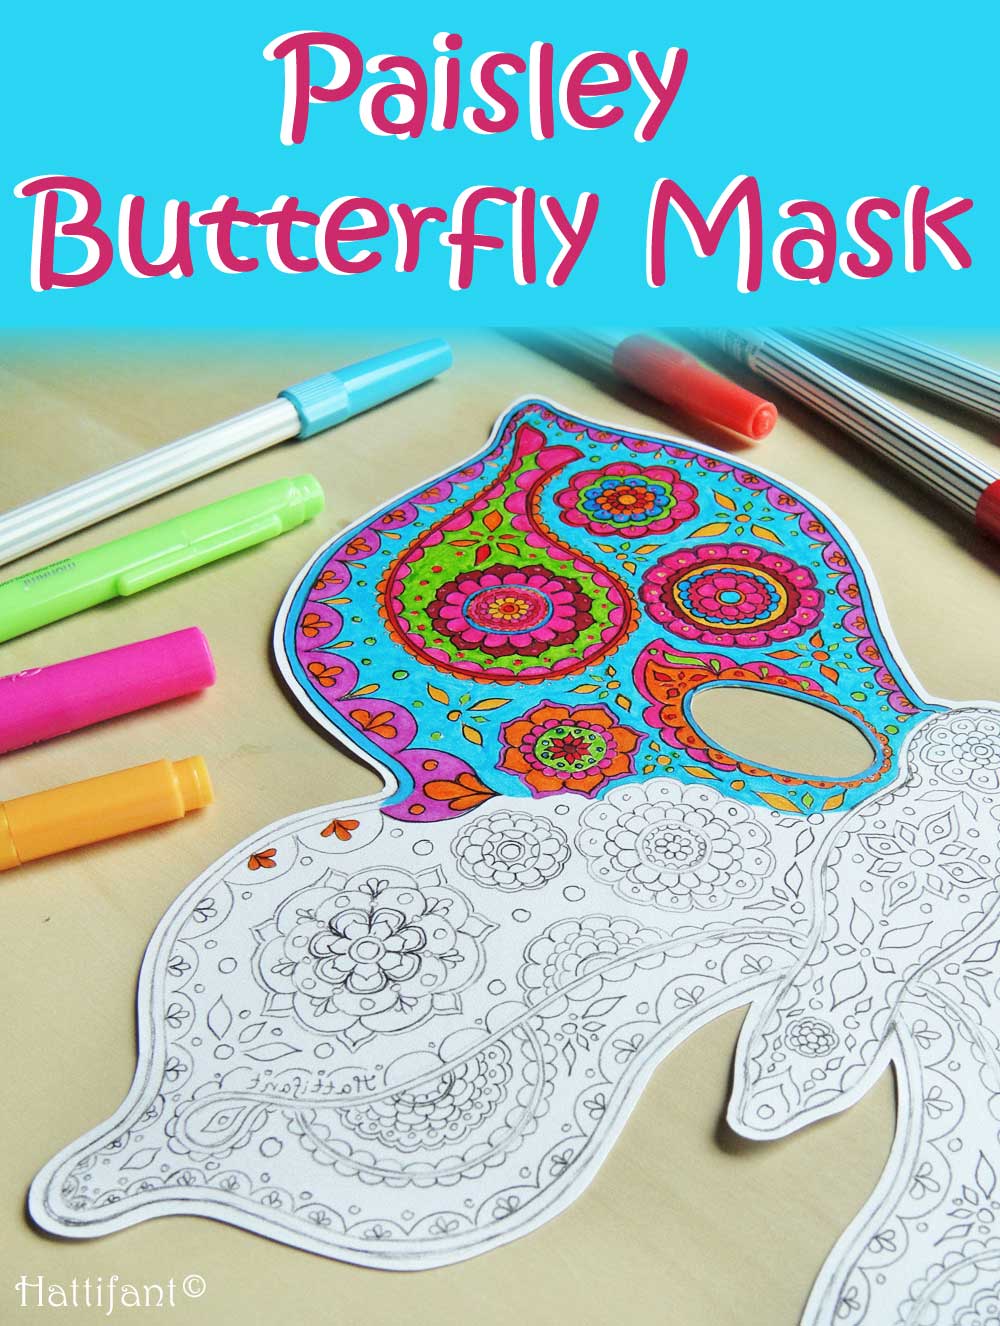 Hattifant Paisley Butterfly Paper Mask to DIY, Color and Craft